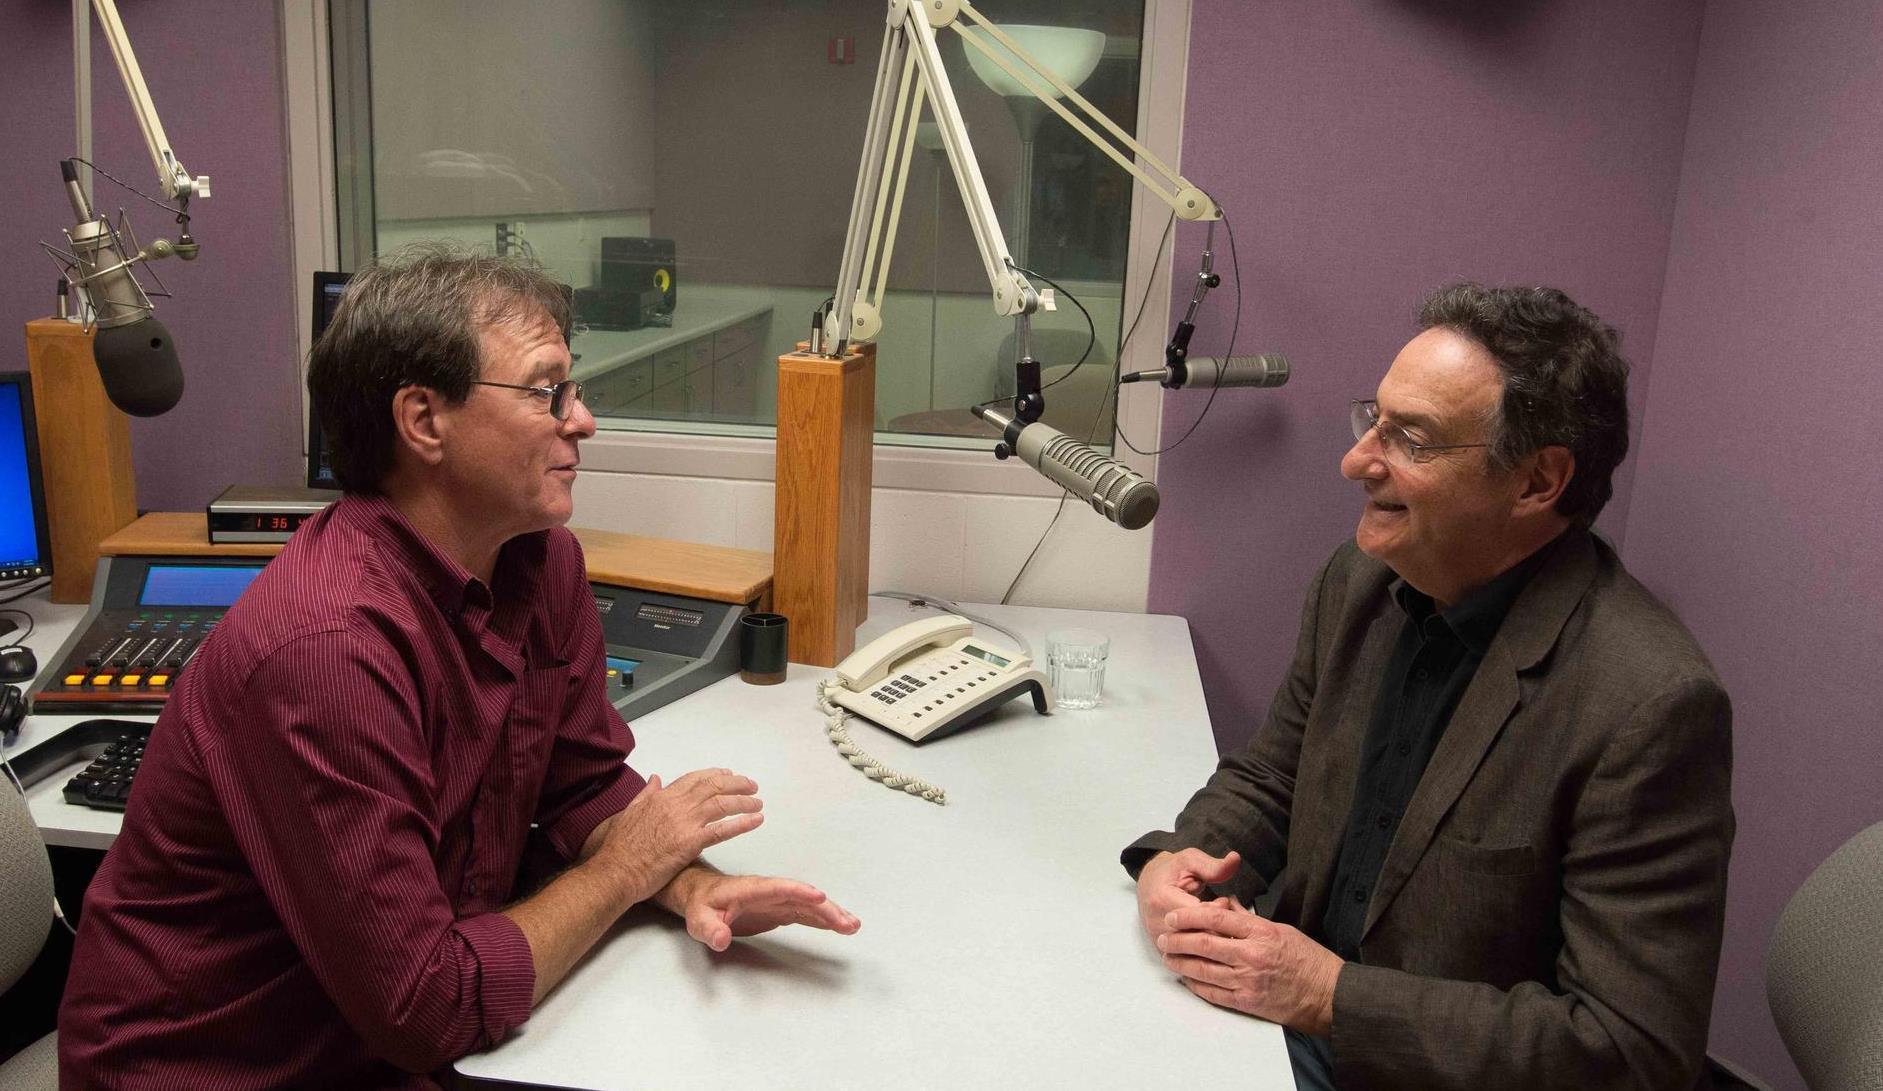 #1336: “Talking Science With Ira Flatow”